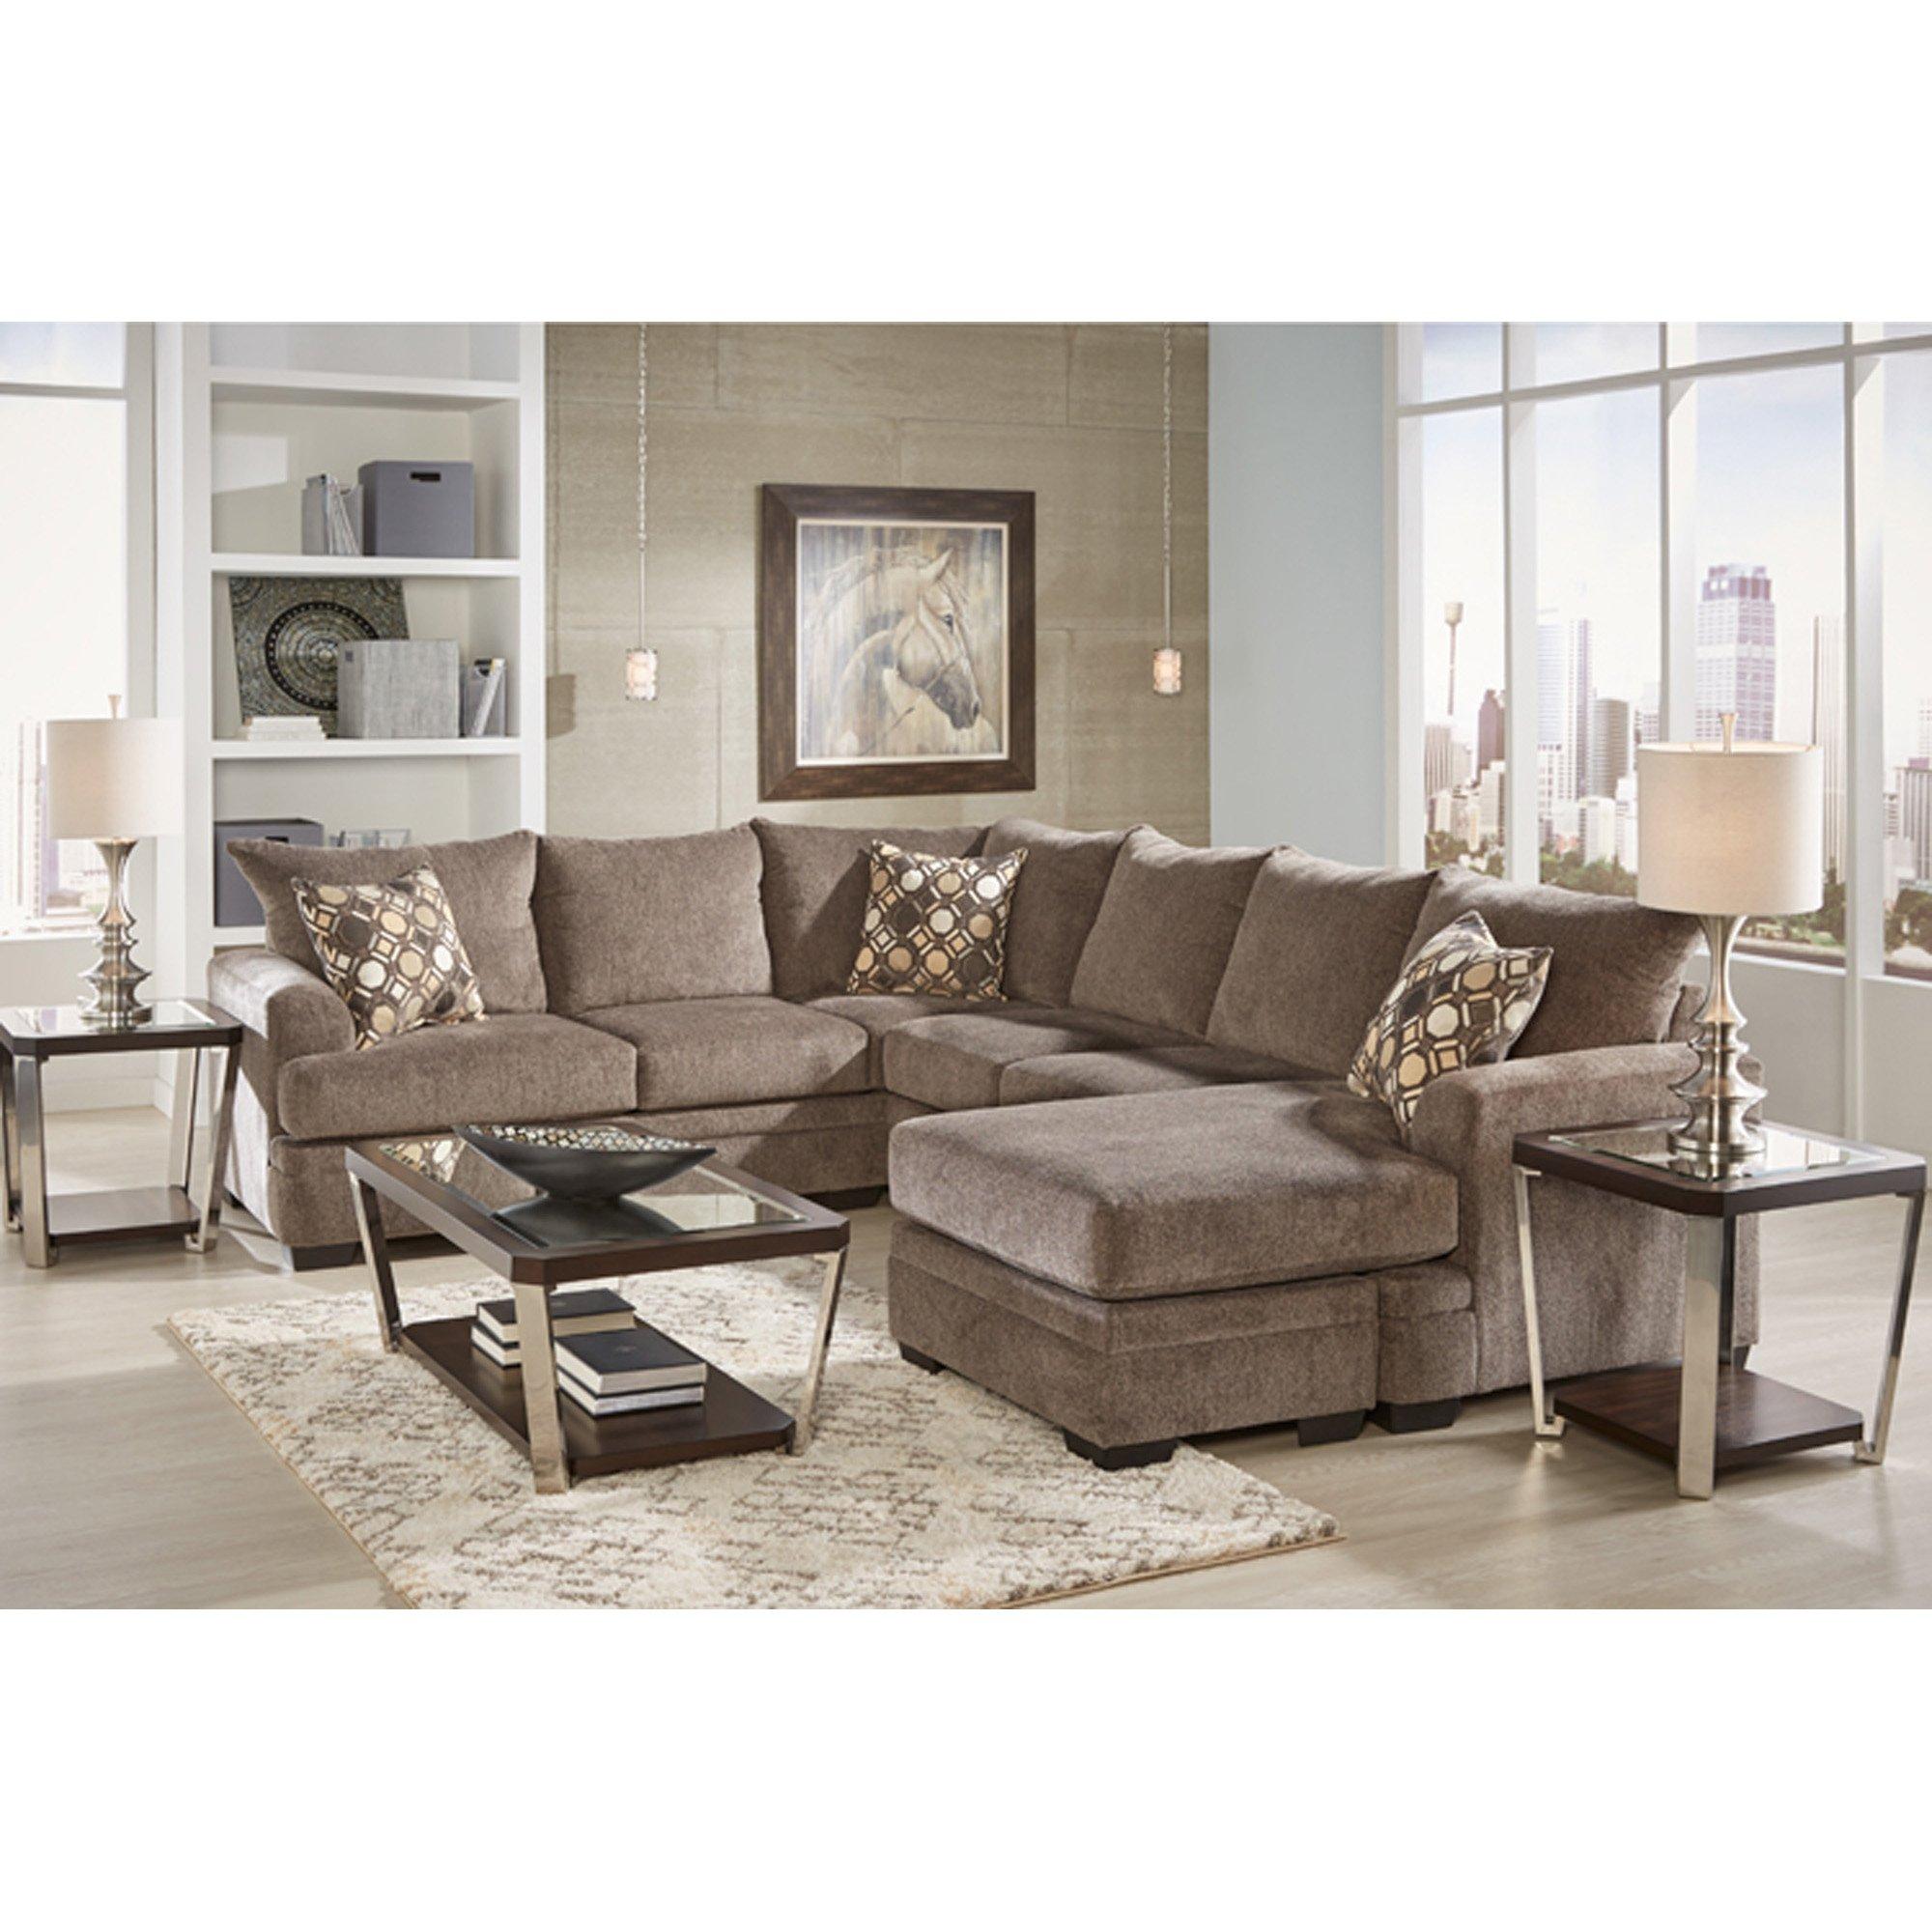 Rent To Own Woodhaven 7 Piece Kimberly Sectional Living Room Collection At Aarons Today